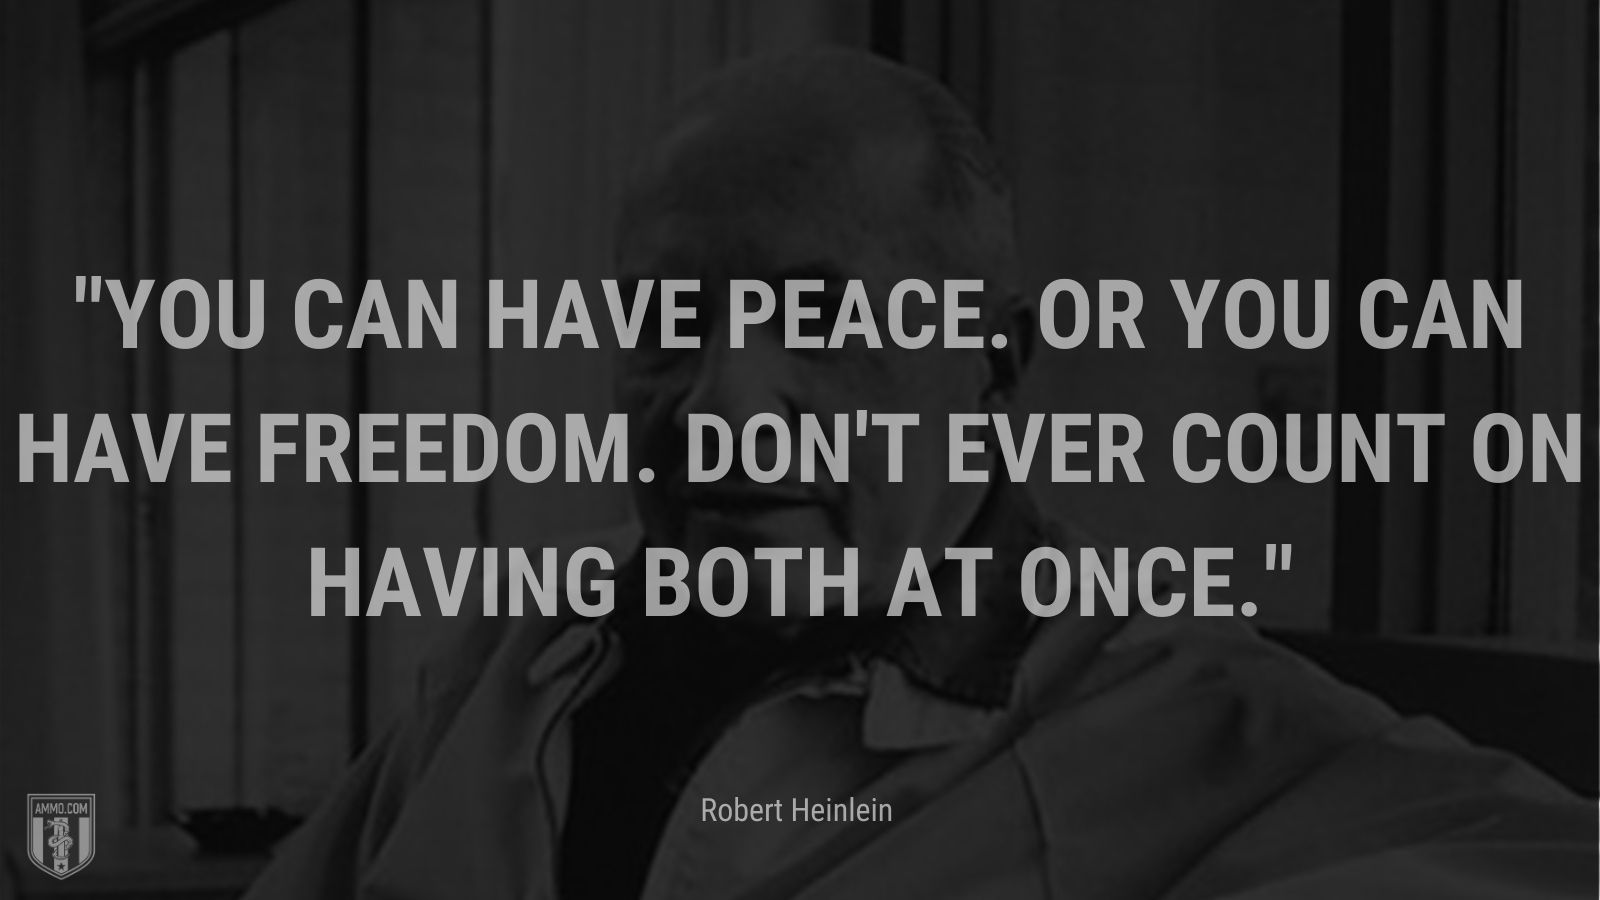 “You can have peace. Or you can have freedom. Don't ever count on having both at once. - Robert Heinlein